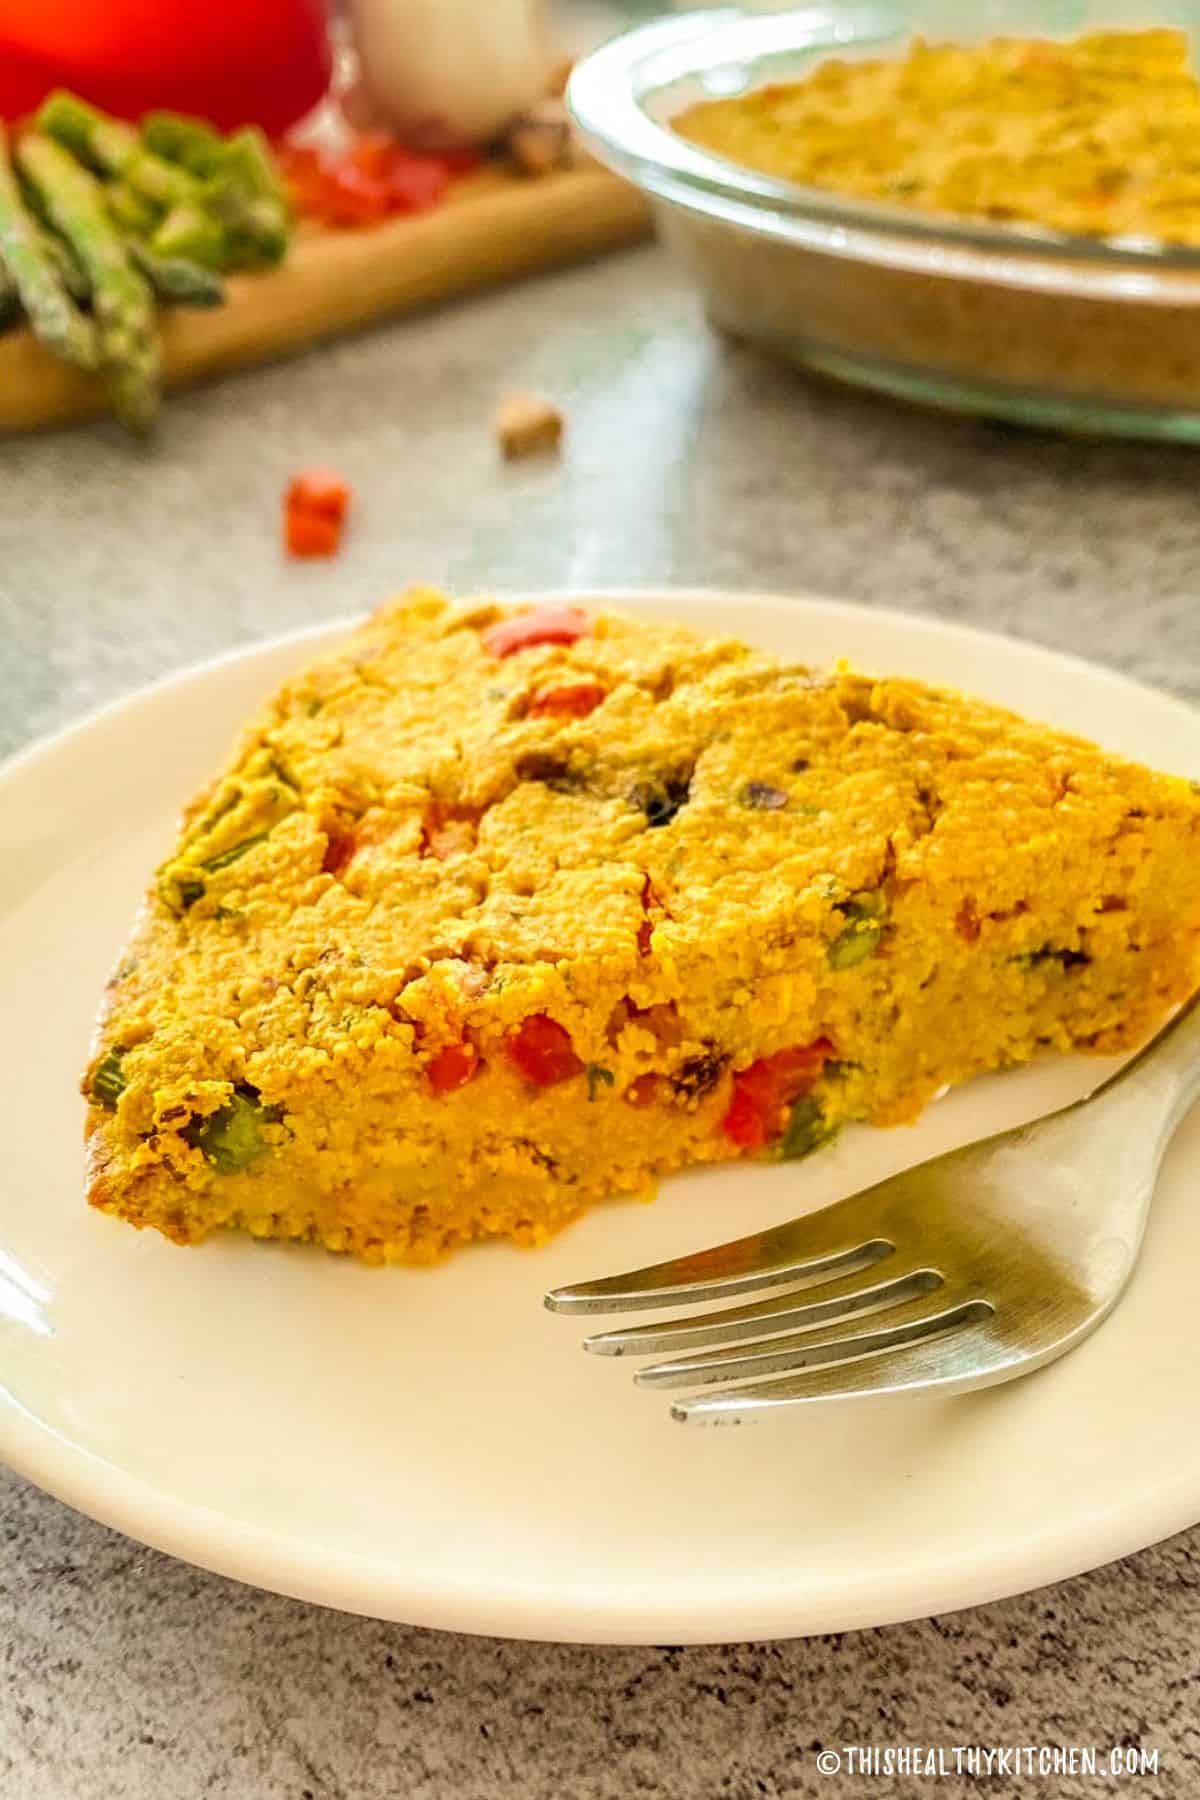 Slice of vegan frittata in plate with fork beside it.